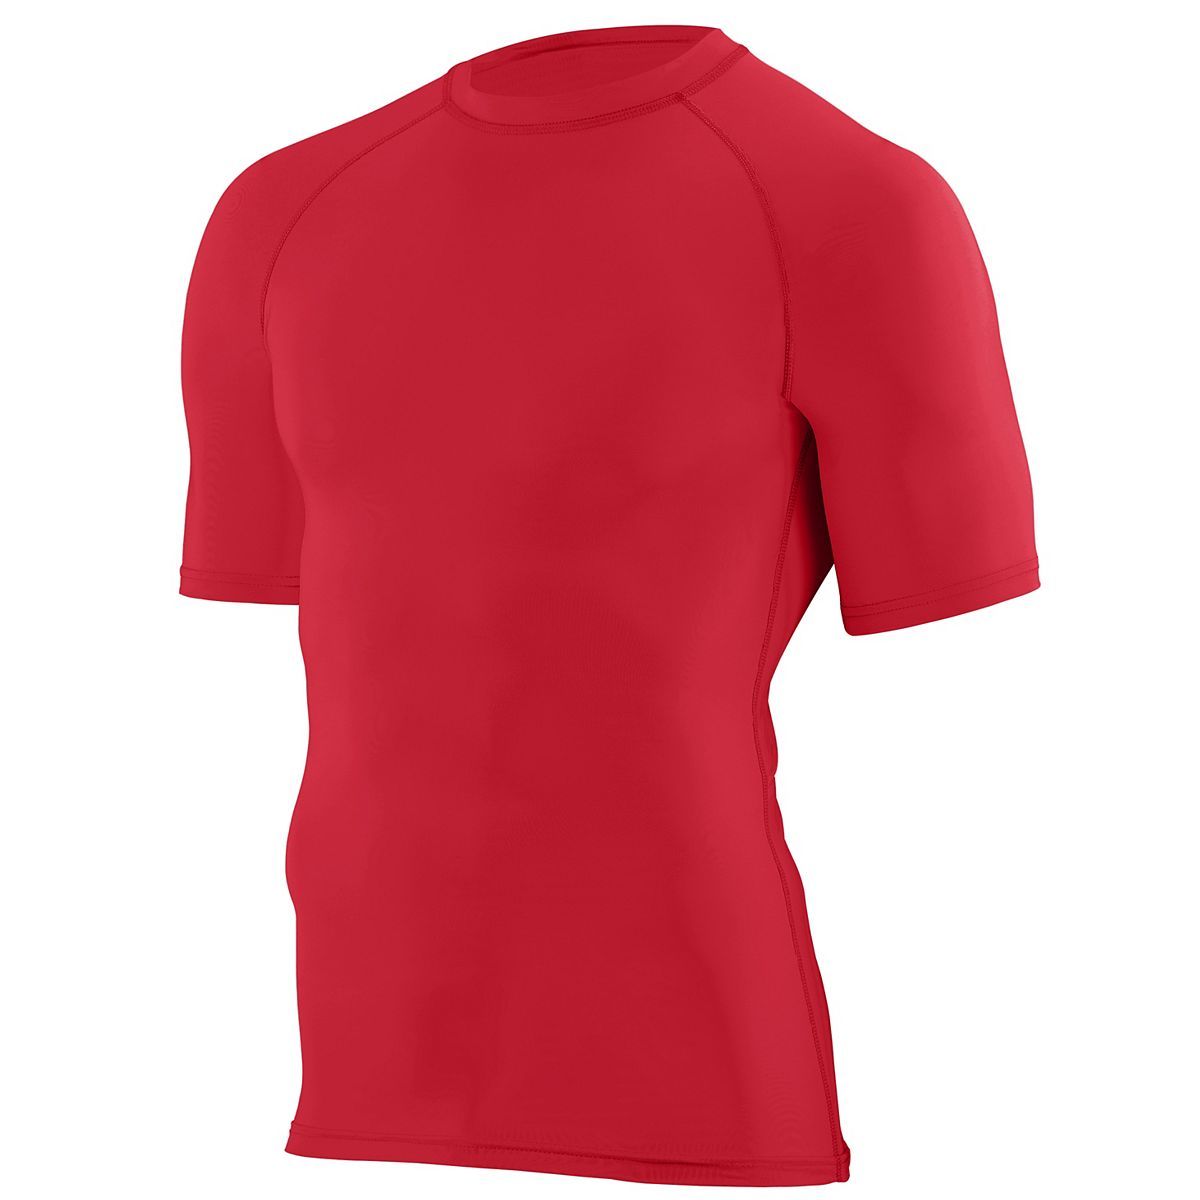 Augusta Sportswear Youth Hyperform Compression Short Sleeve Tee in Red  -Part of the Youth, Youth-Tee-Shirt, T-Shirts, Augusta-Products, Shirts product lines at KanaleyCreations.com